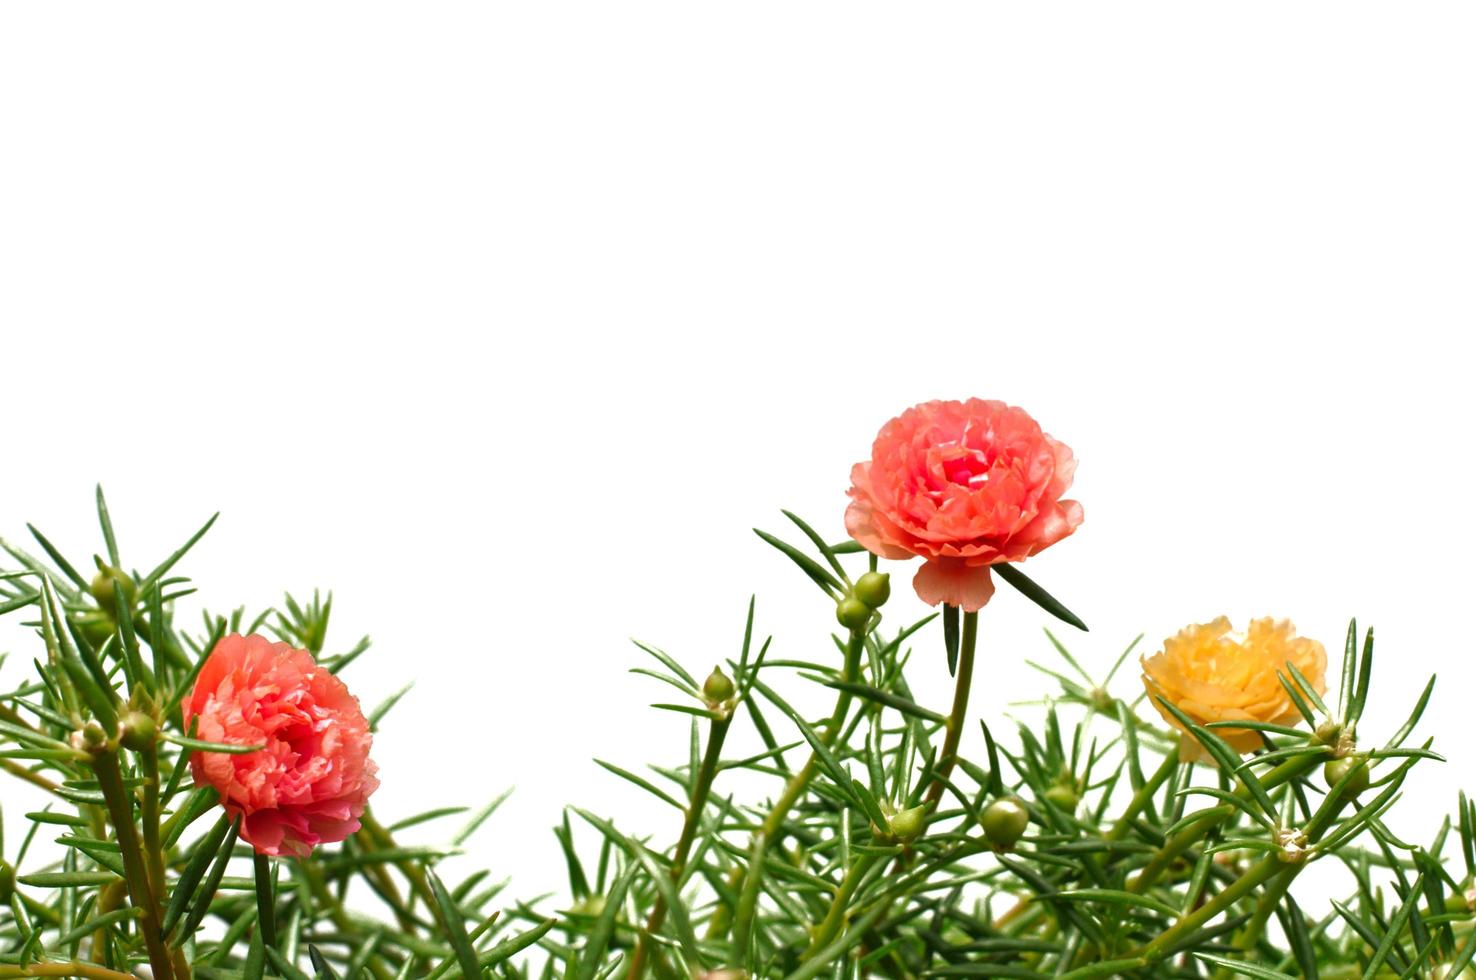 Moss Rose flower or Purslane, Ten O'Clock, Sun Rose, Portulaca flowers with green leaves hanging from the top isolated on white background photo